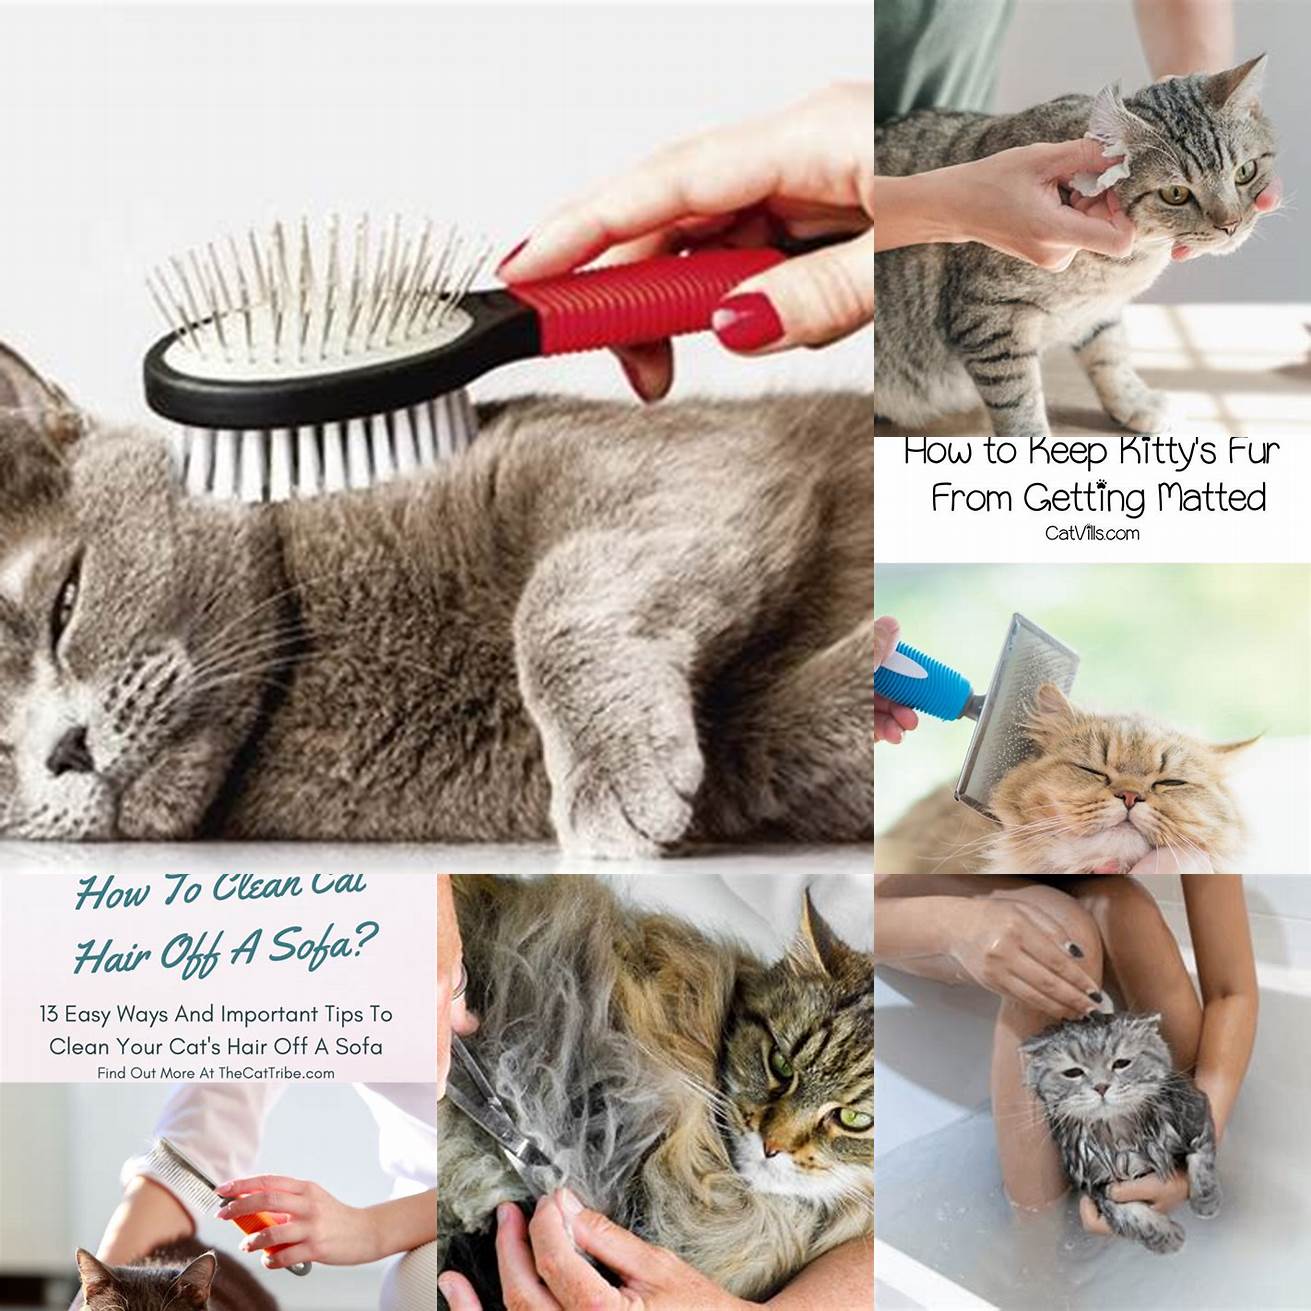 5 Rinse your cats fur